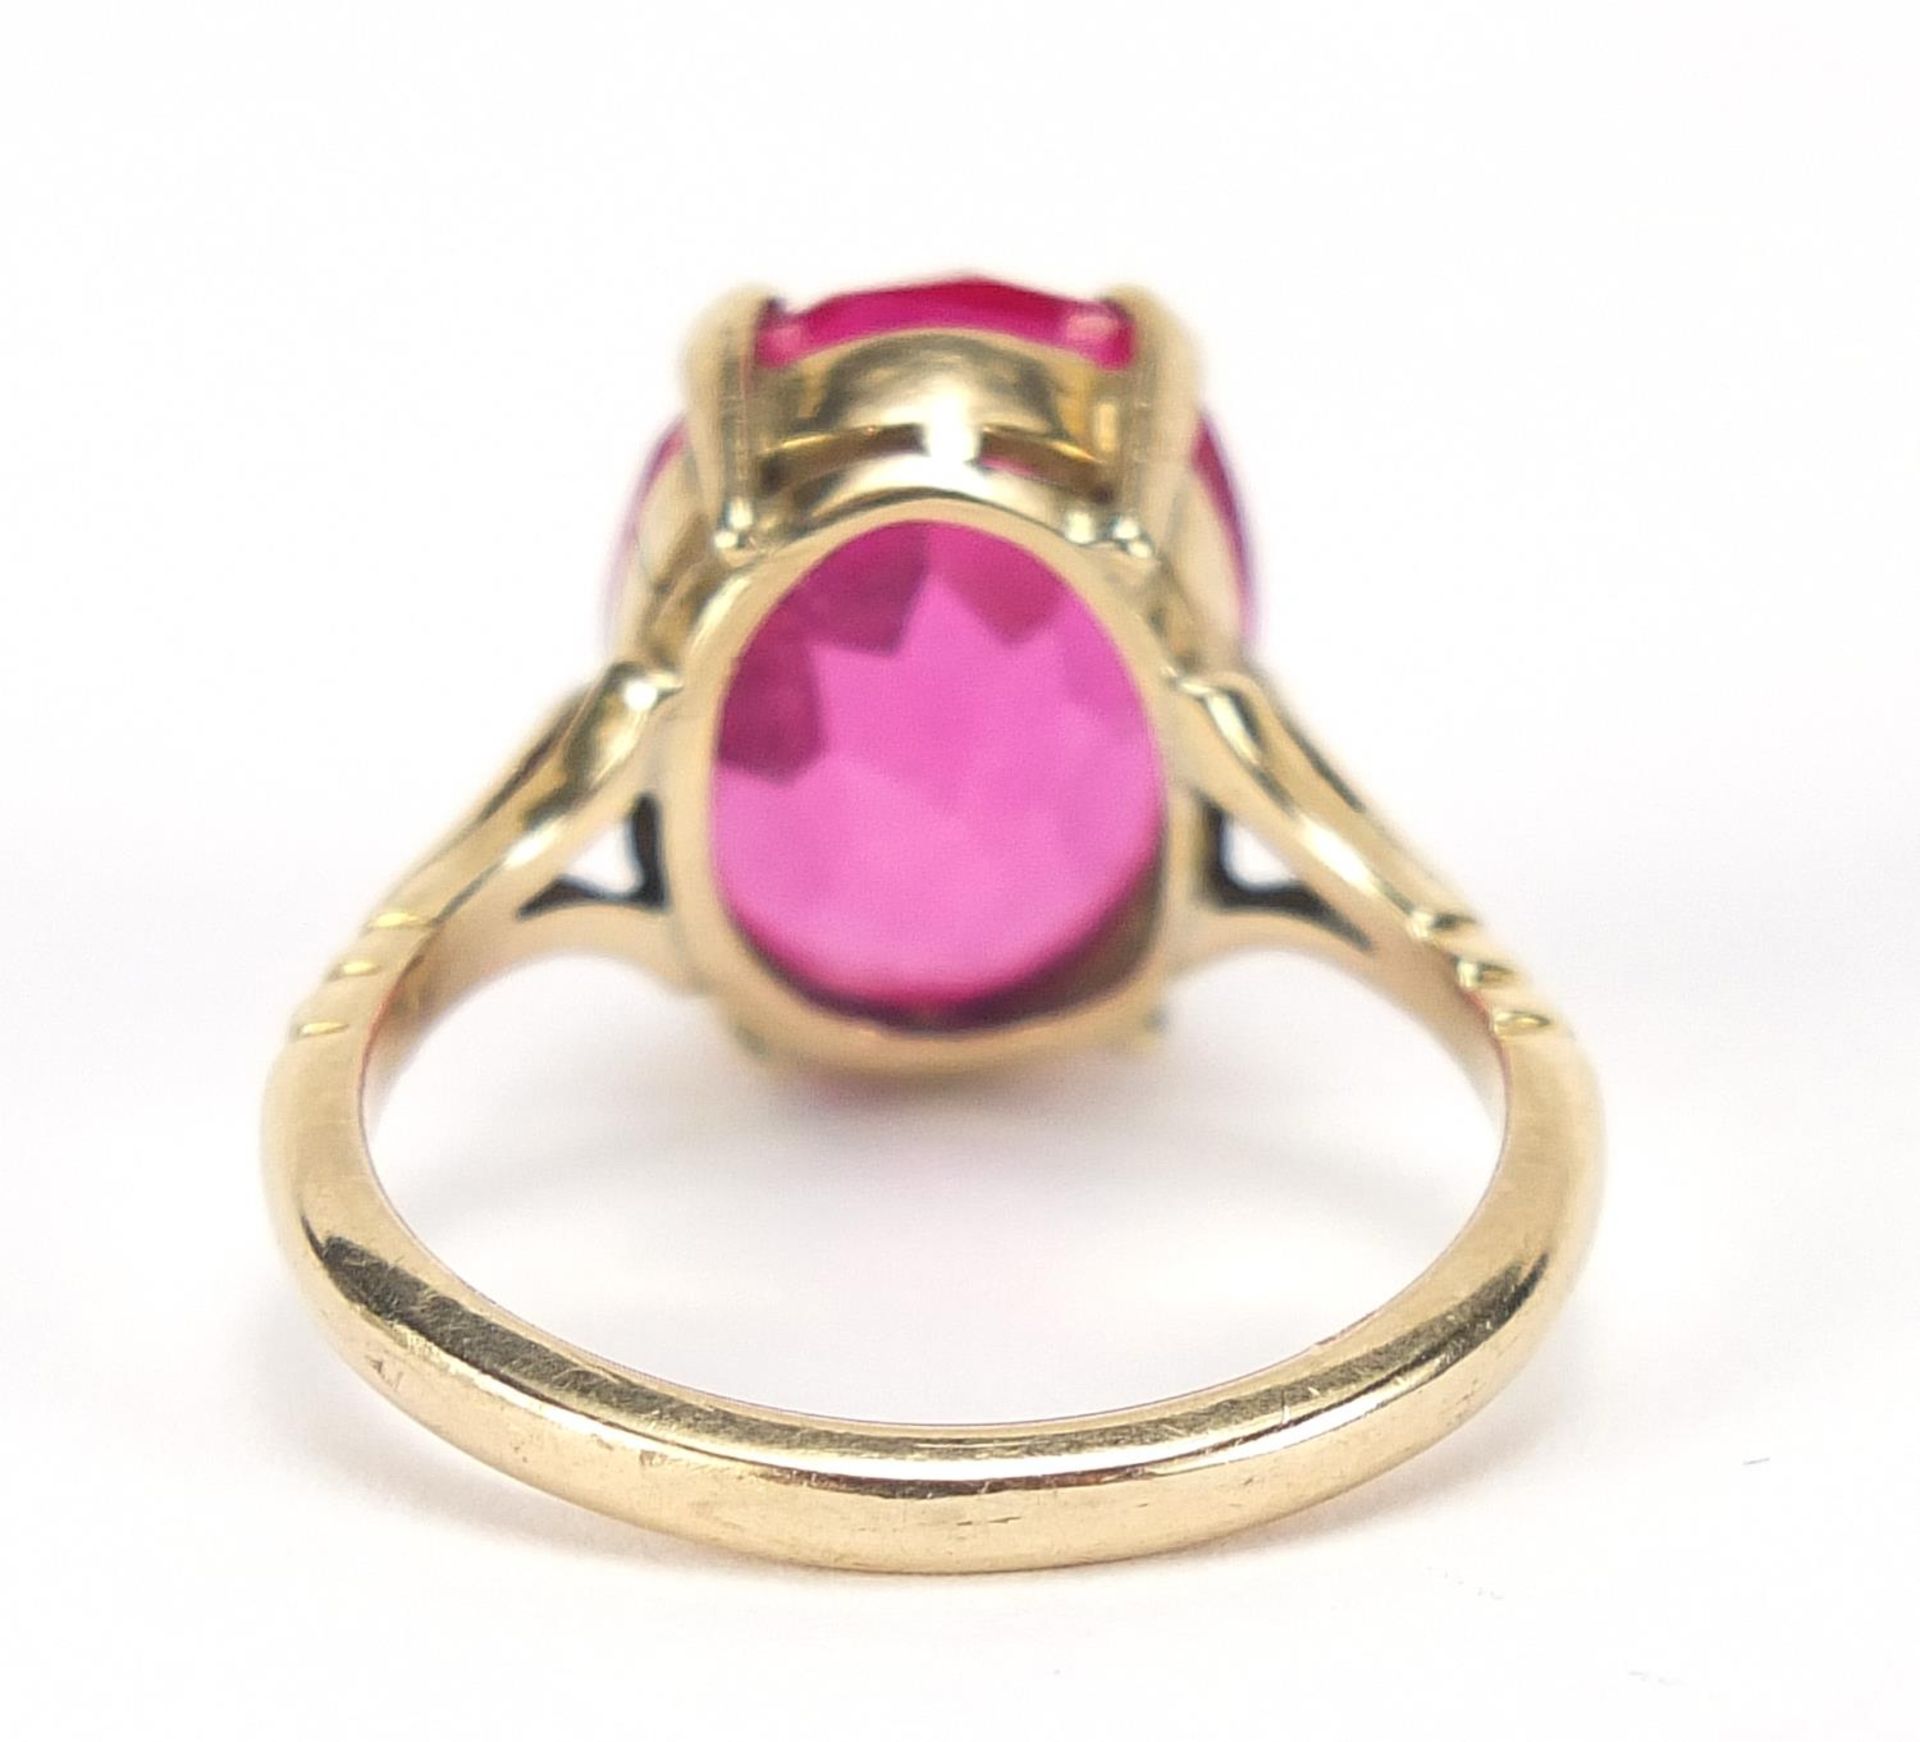 Unmarked gold ruby solitaire ring, the stone approximately 14.5mm x 10mm x approximately 6mm deep, - Image 3 of 4